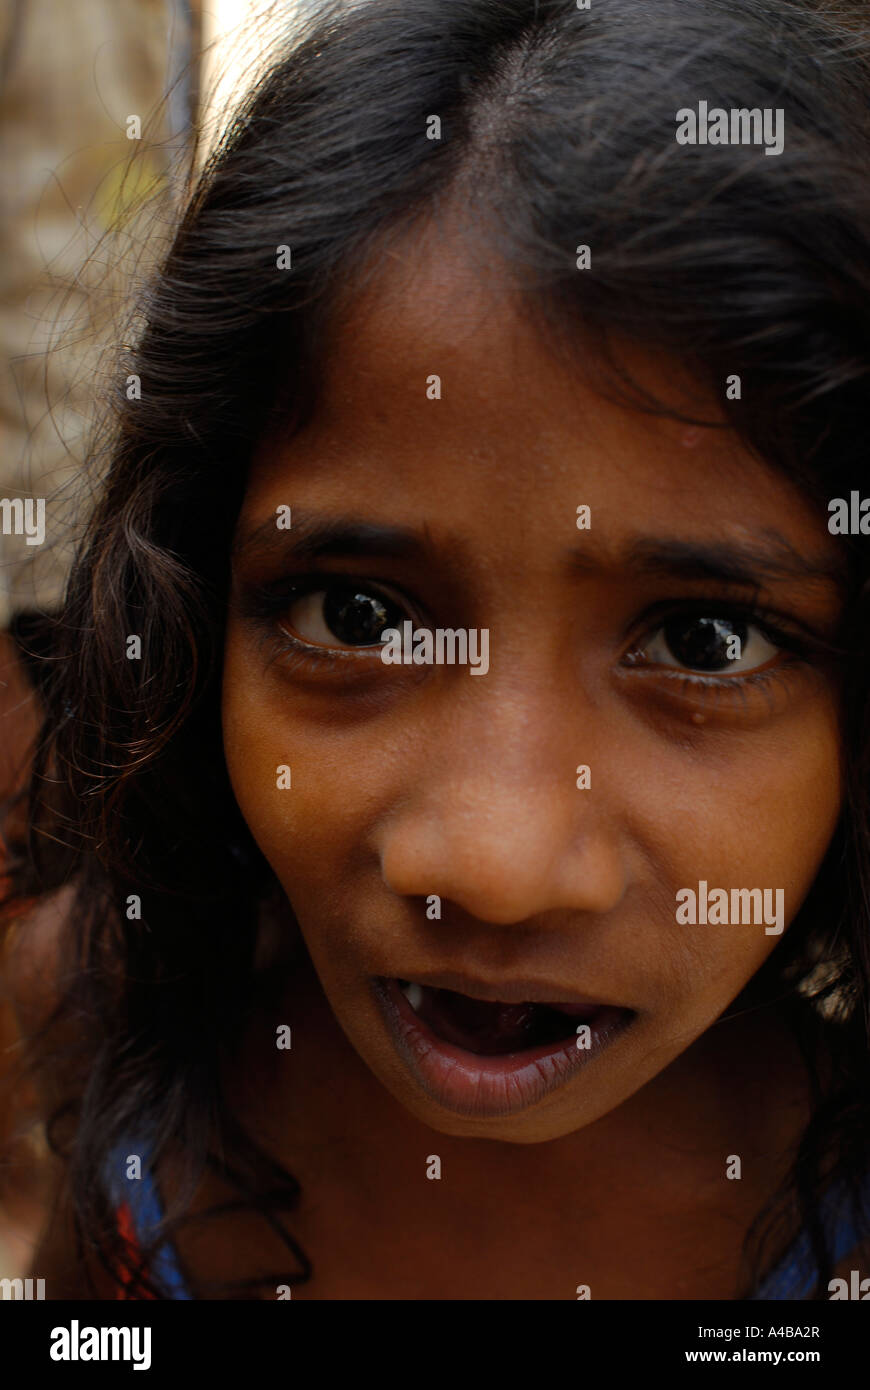 Stock Image of young Dalit girl with long hair at community well in  Jagathapuram slum in Chennai Tamil Nadu India Stock Photo - Alamy